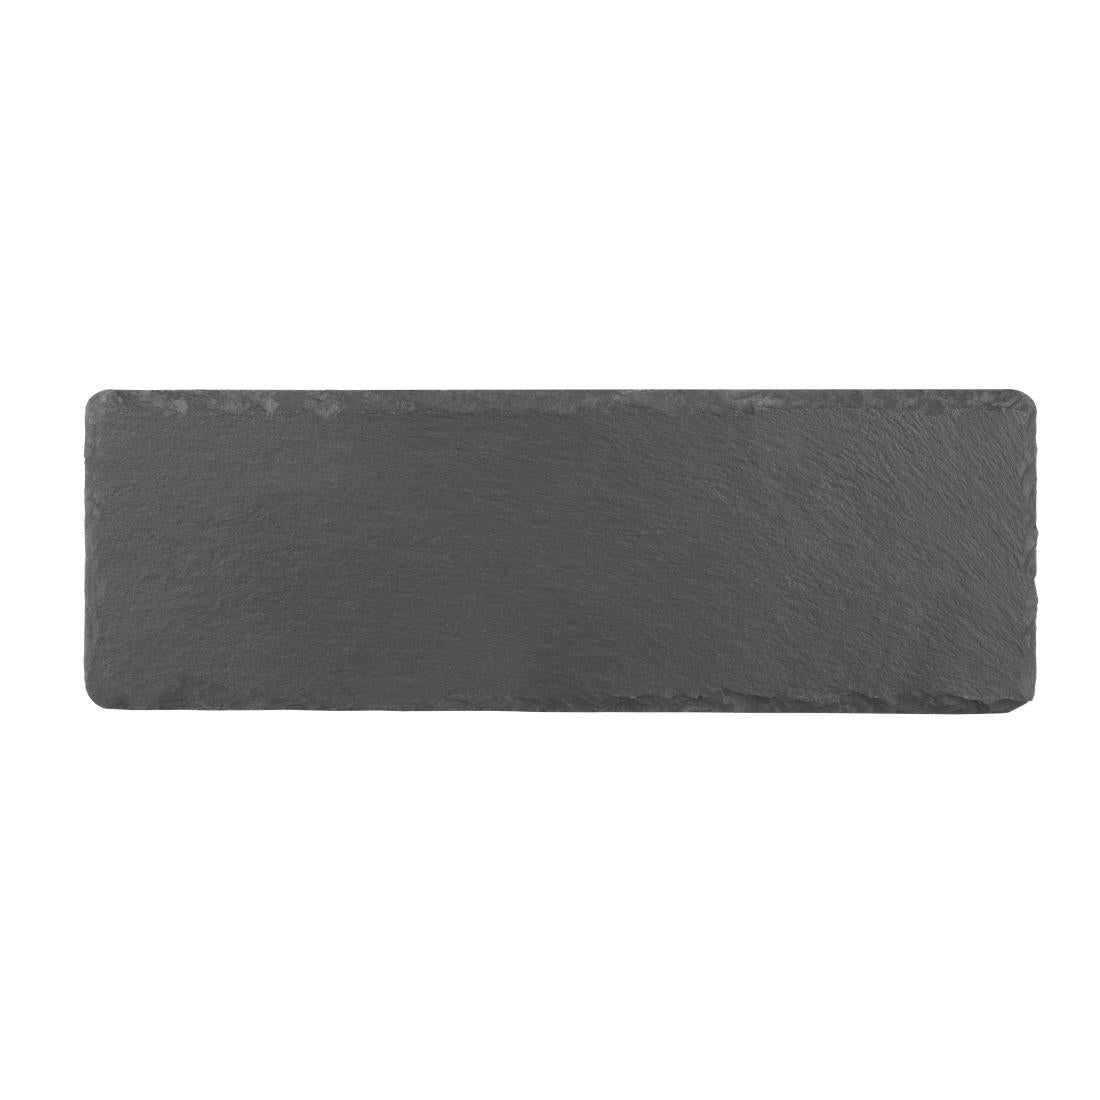 Olympia Natural Slate Rectangular Display Trays 300mm (Pack of 4)